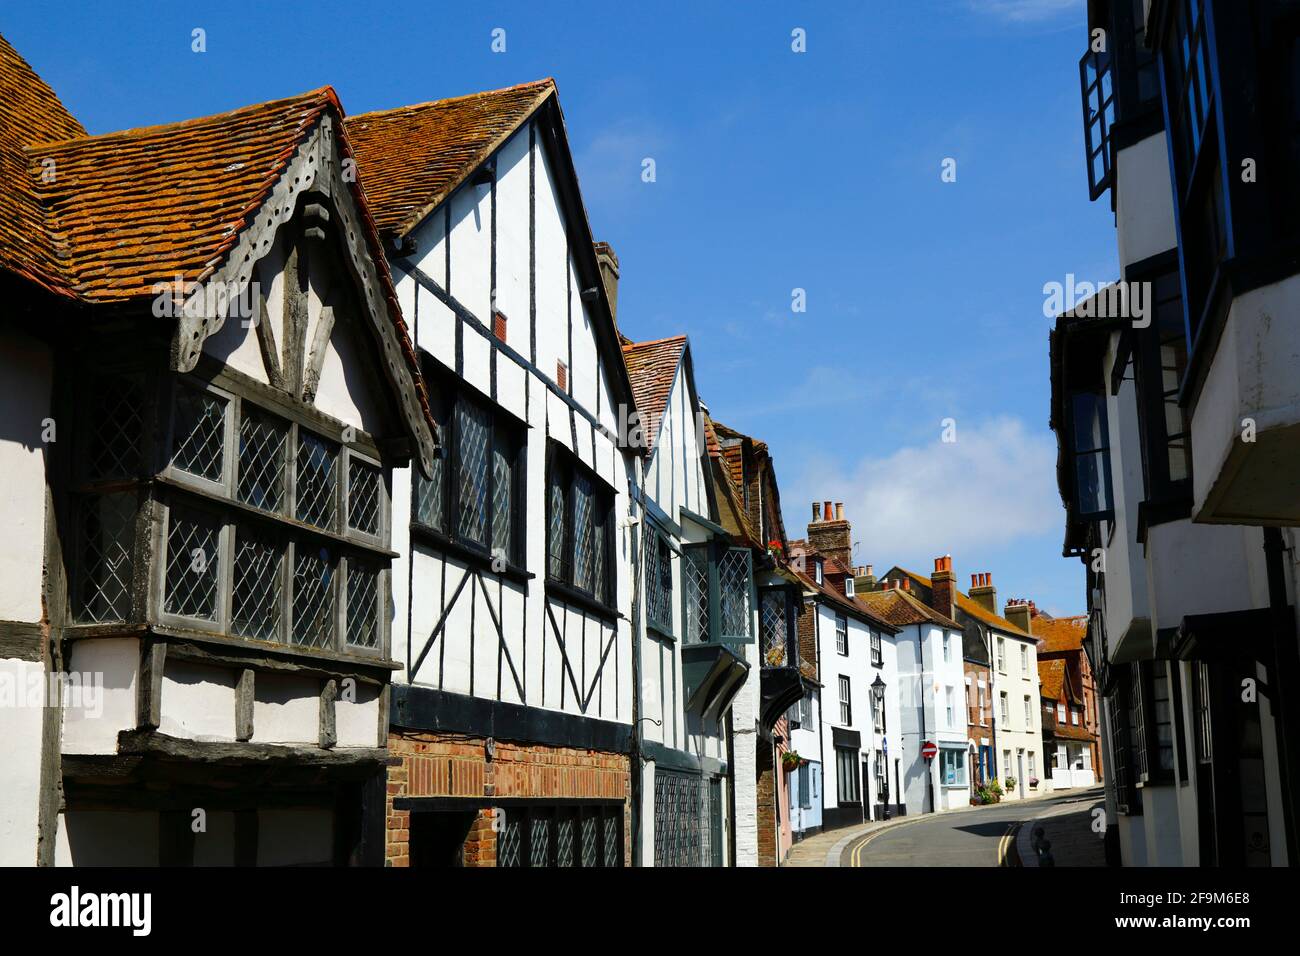 Quaint historic timber framed houses in All Saints Street  in the Old Town, Hastings, East Sussex, England Stock Photo